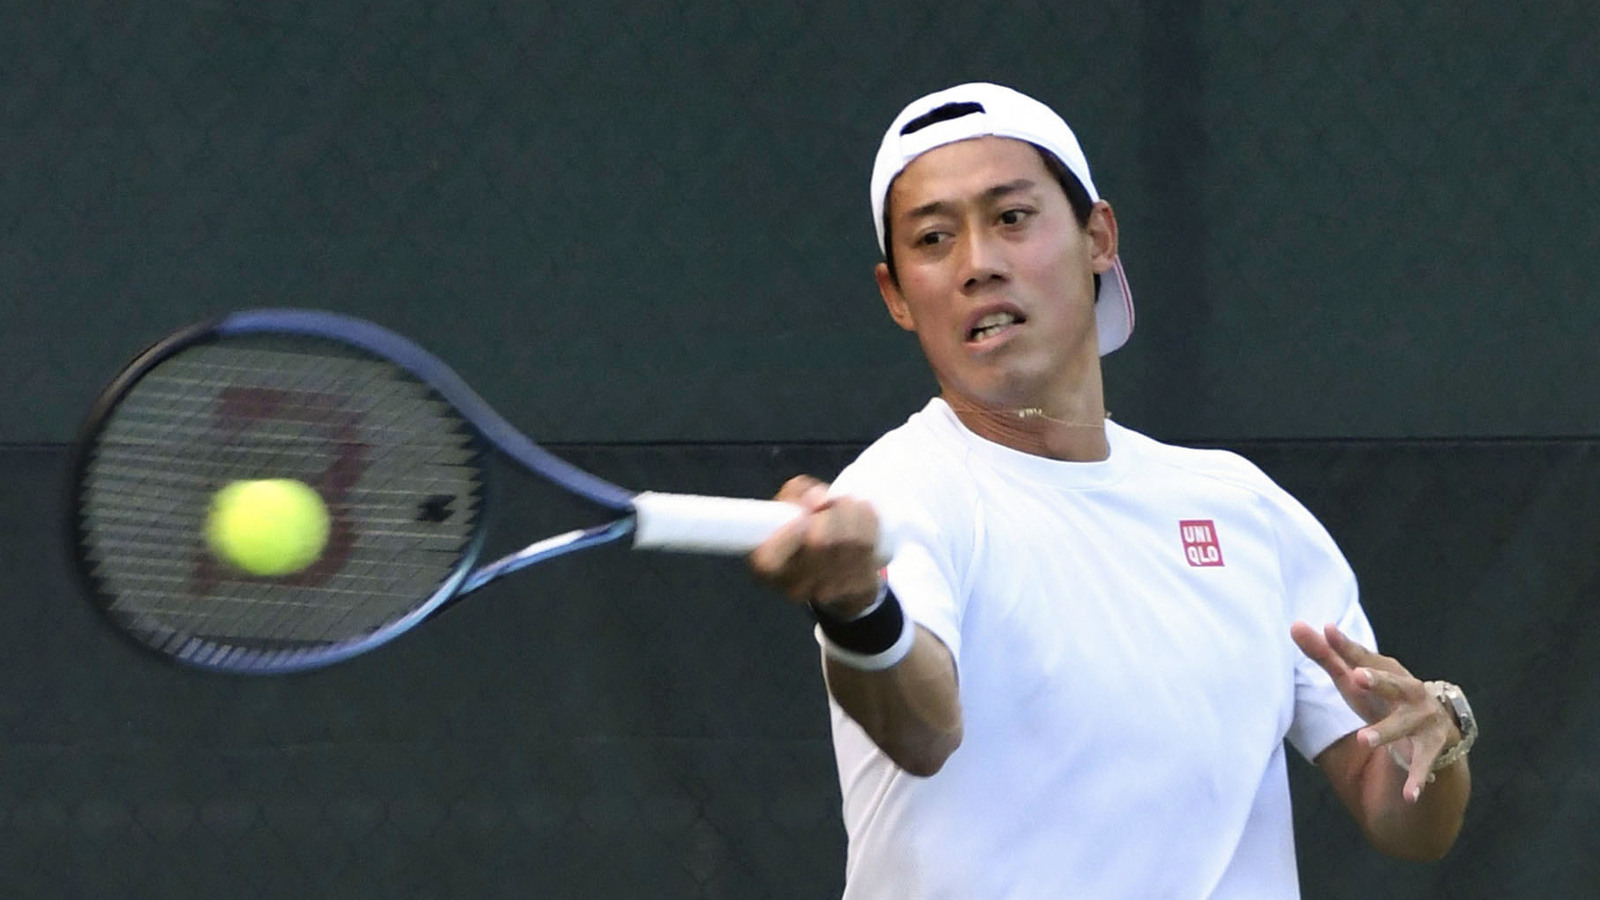 Nishikori Steps Up Comeback With Entry Into Two More Challenger Events